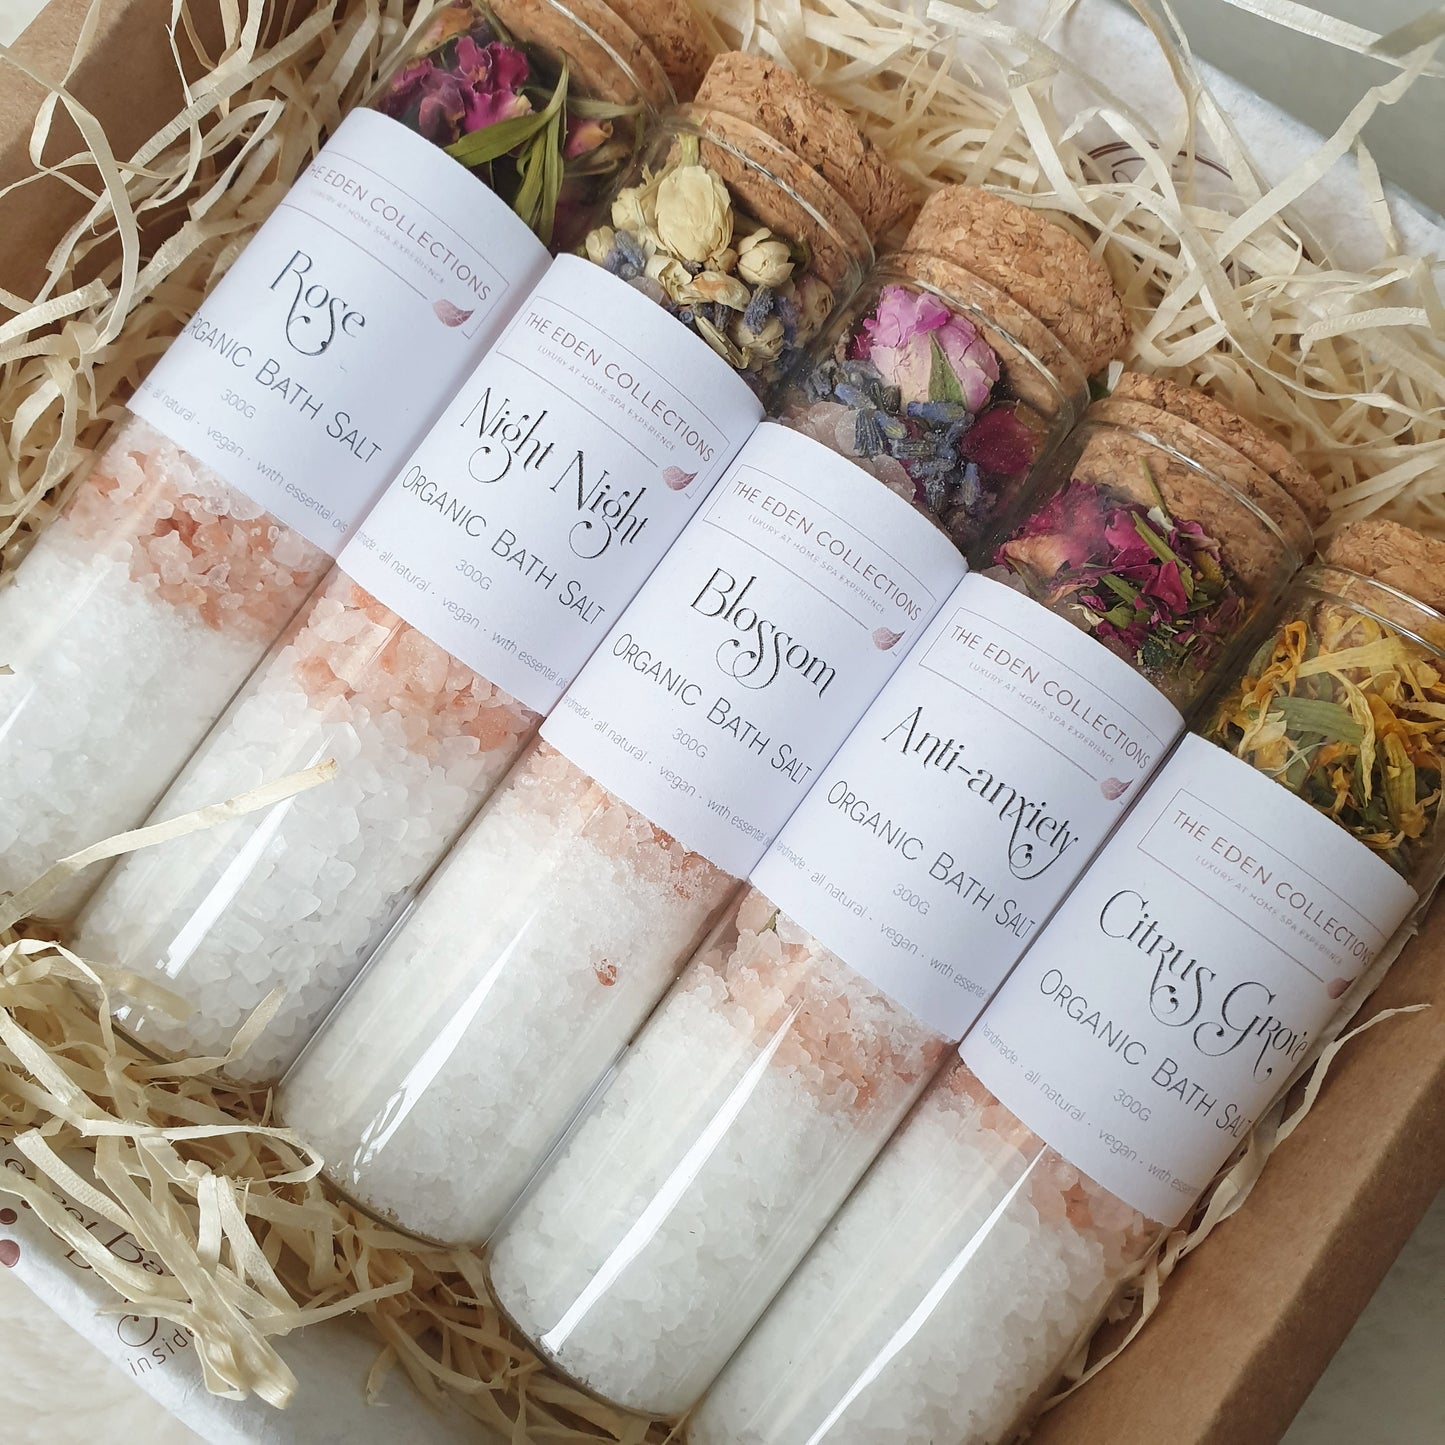 The Eden Collections range of organic epsom, dead sea and pink himalayan bath salts, featuring Rose, Night Night, Blossom, Anti-anxiety, and Citrus Grove.